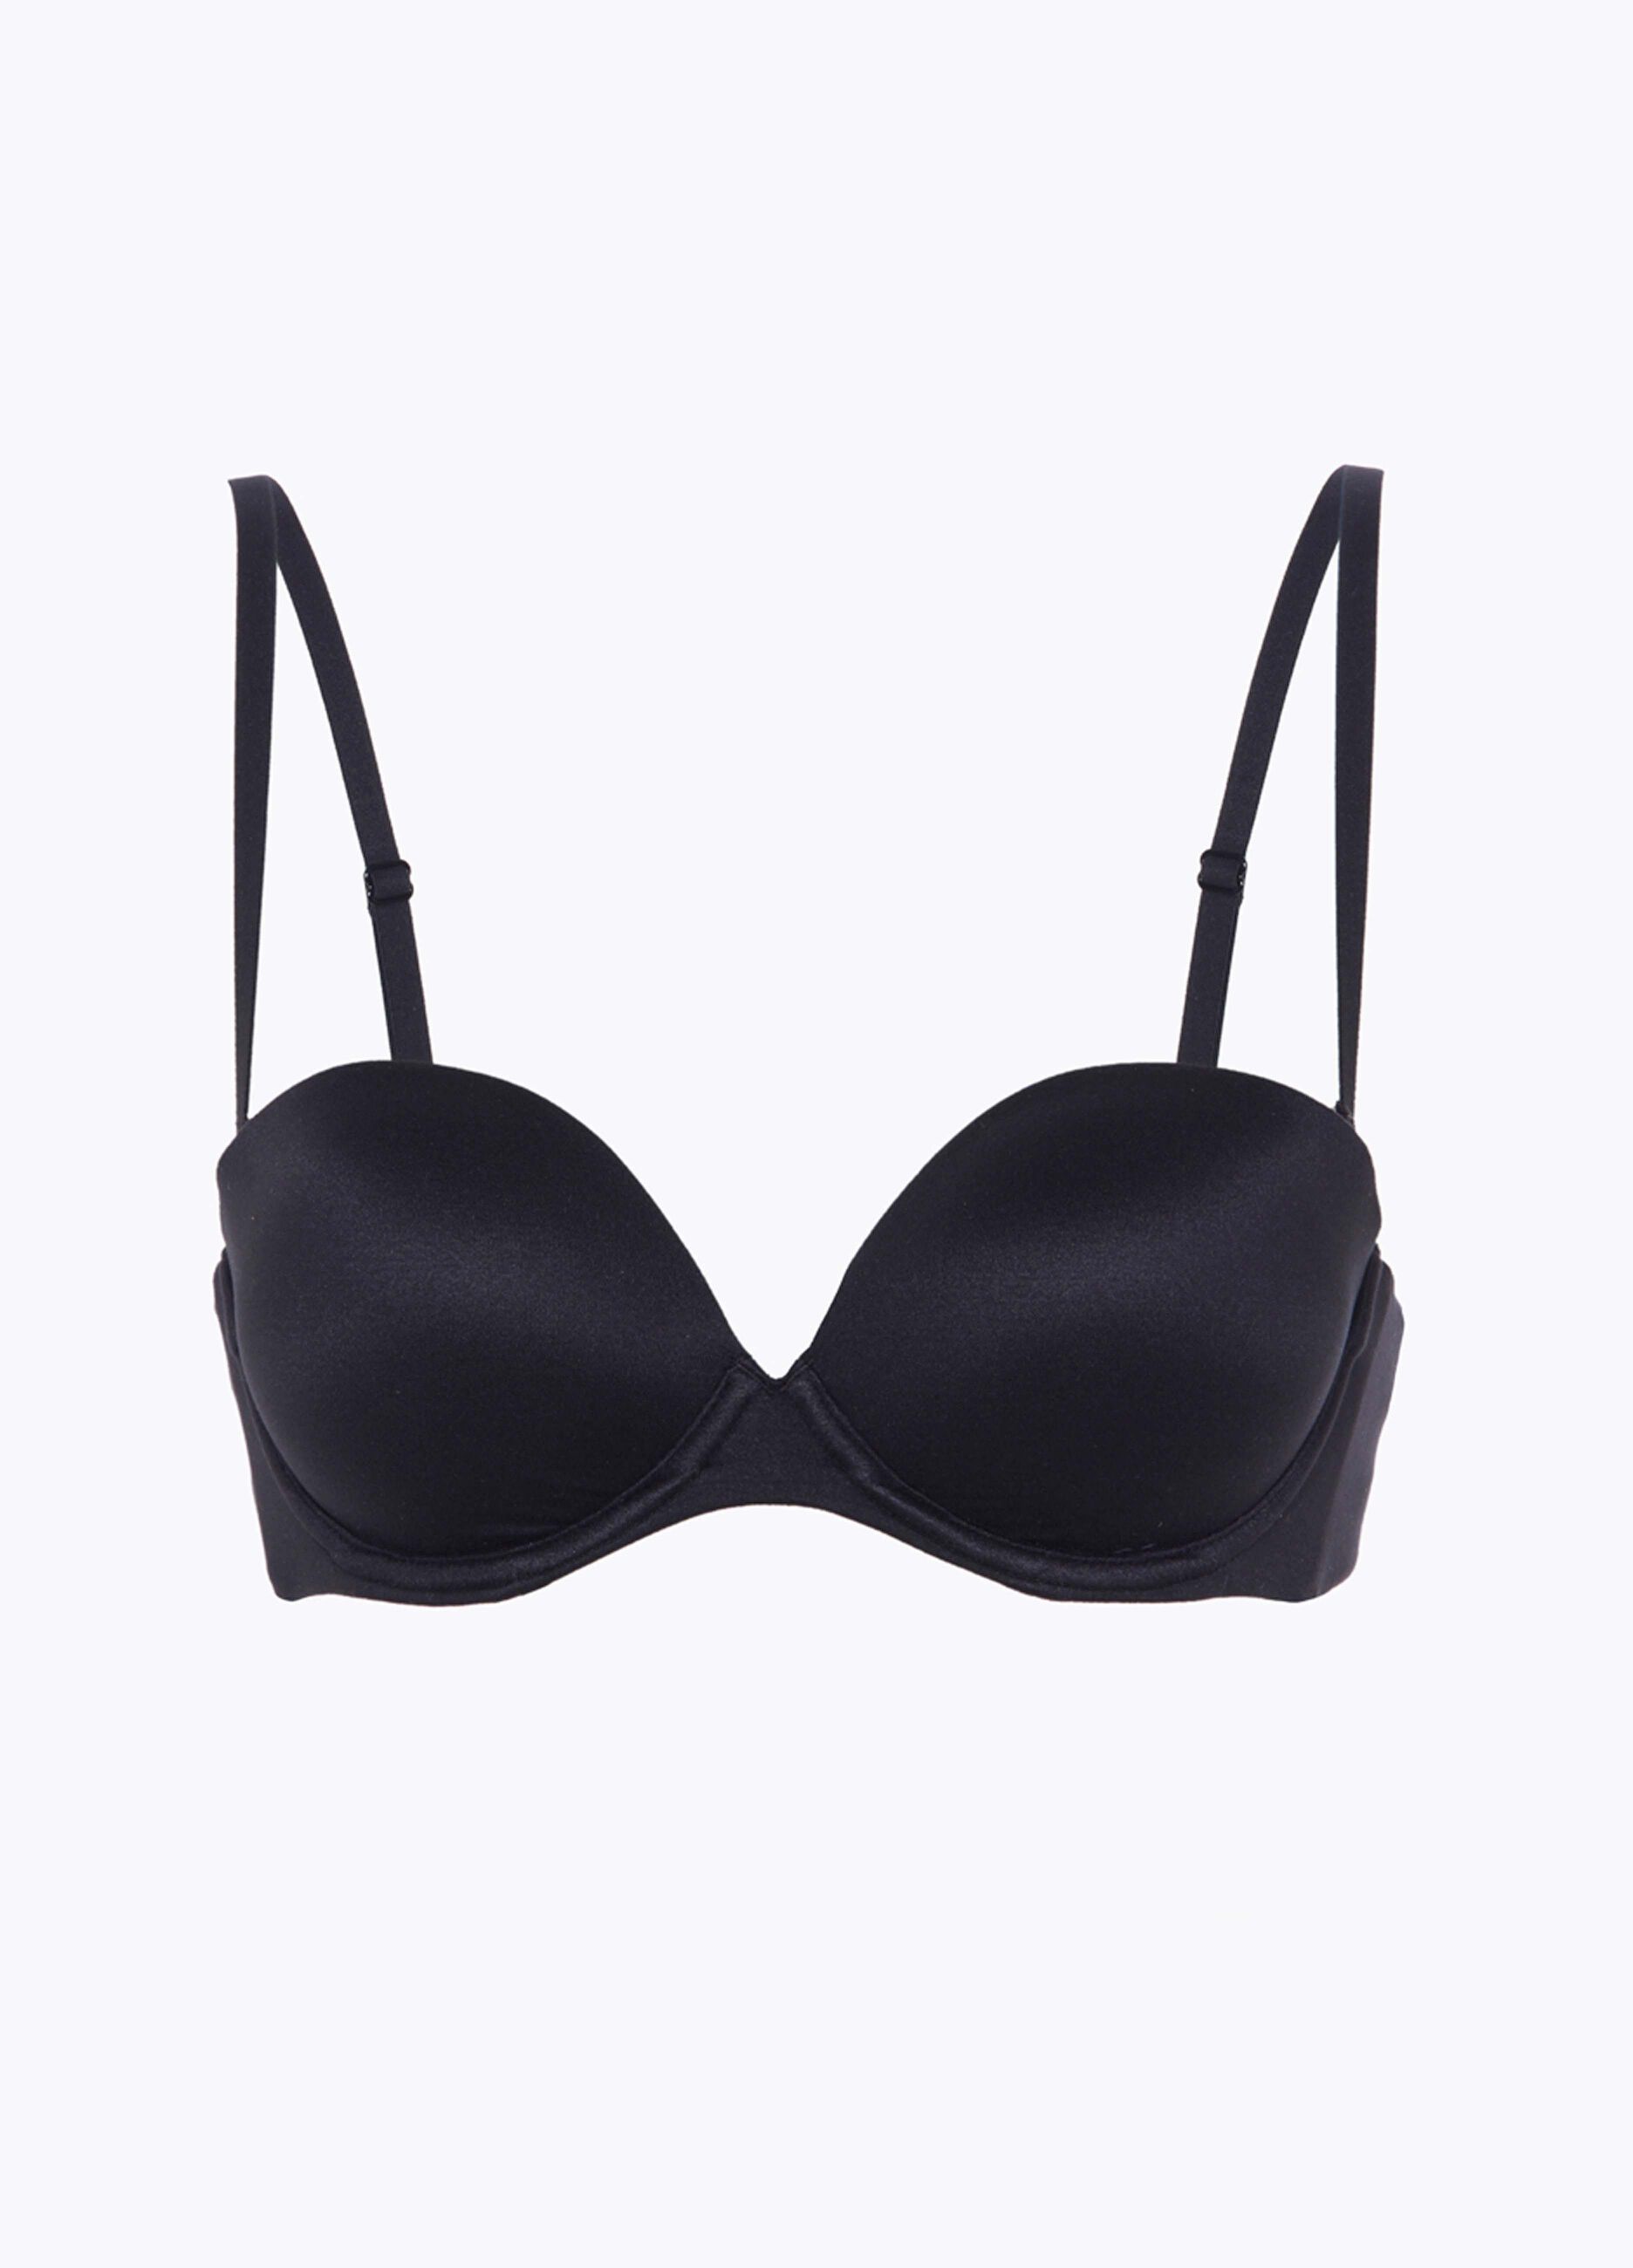 LOVABLE Woman's Black Body Bliss push-up bra with removable shoulder straps